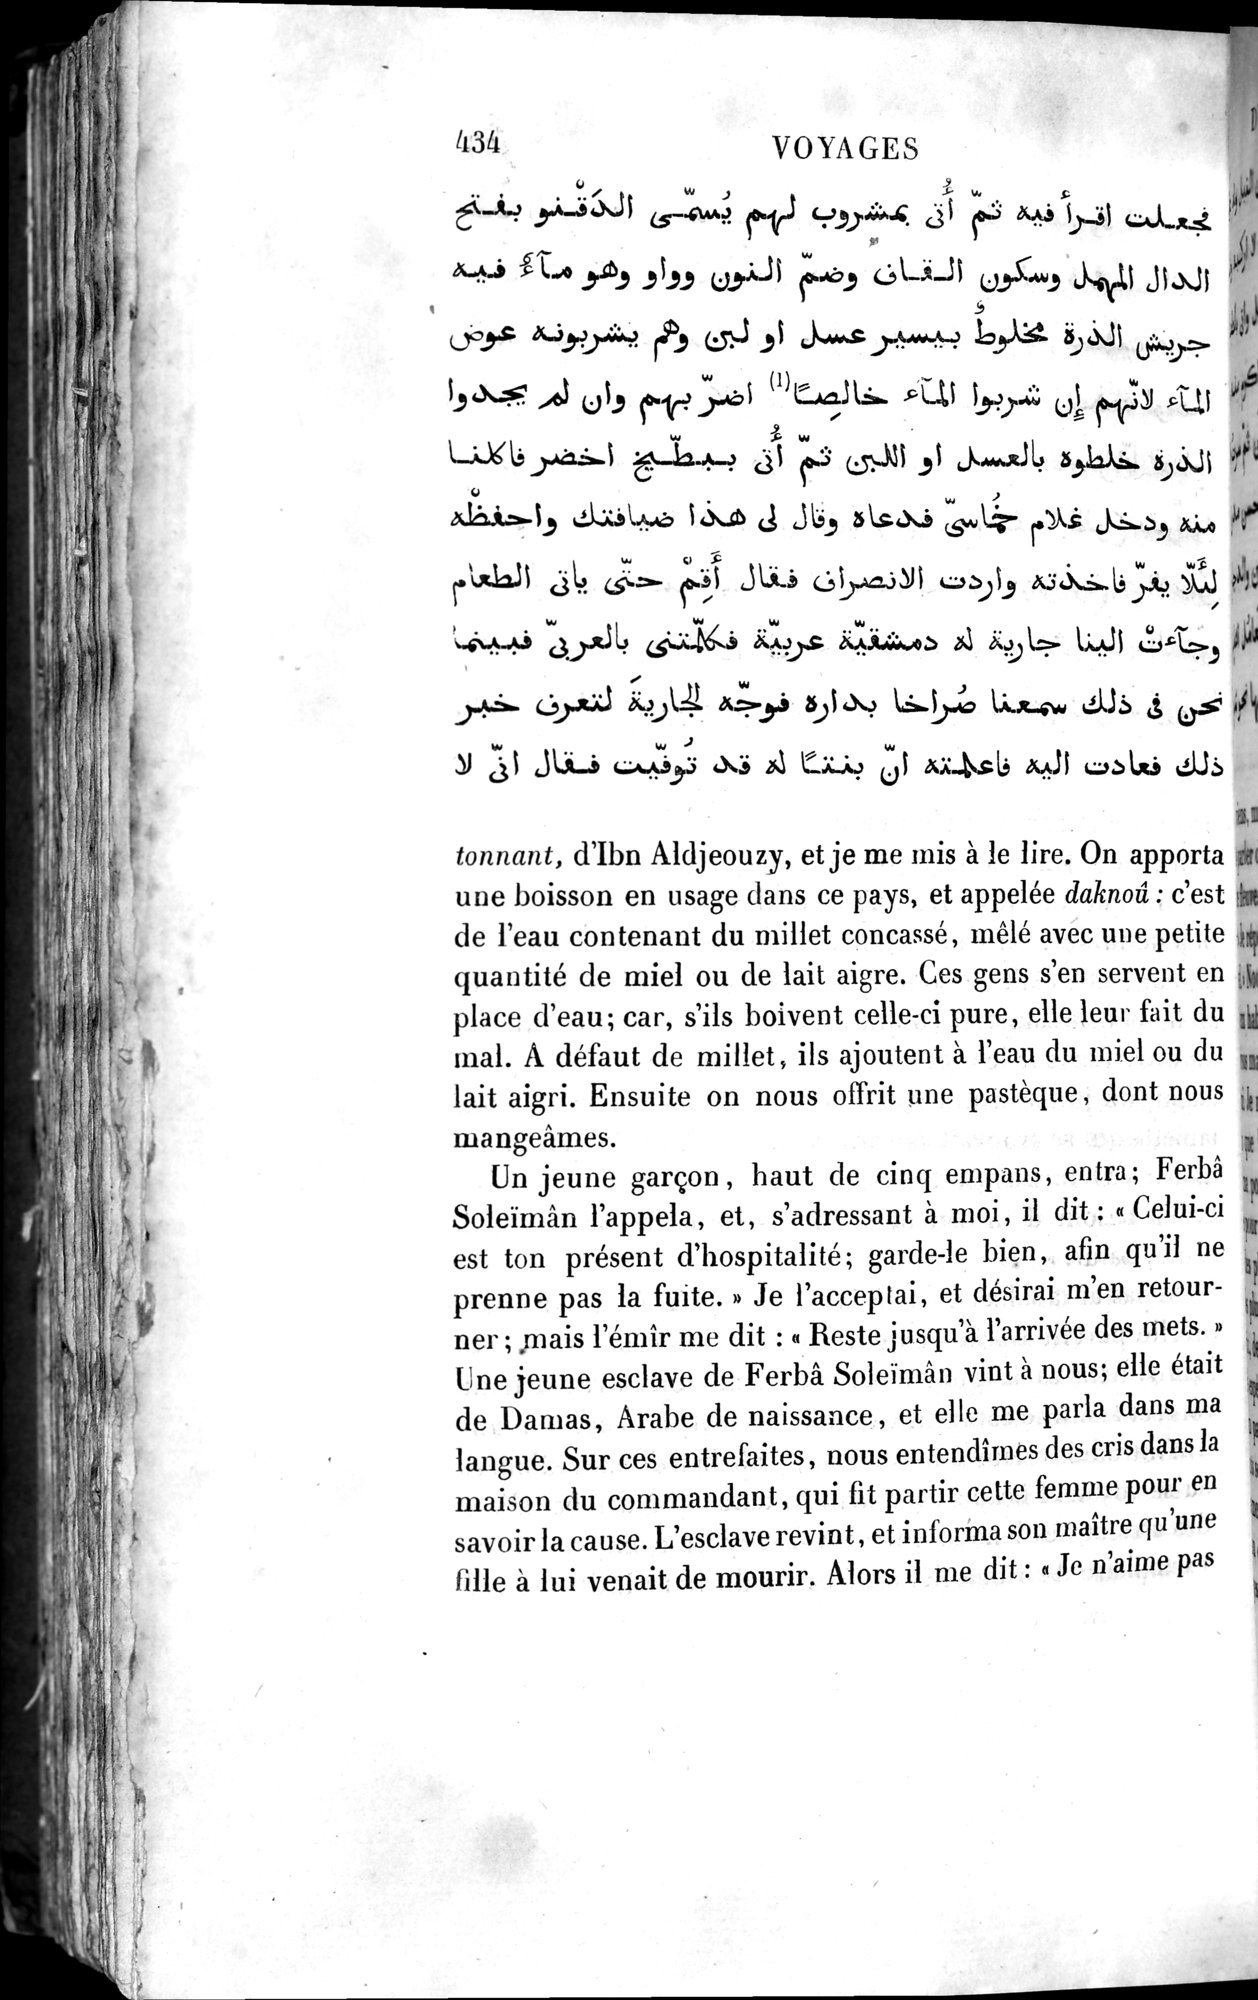 Voyages d'Ibn Batoutah : vol.4 / Page 446 (Grayscale High Resolution Image)